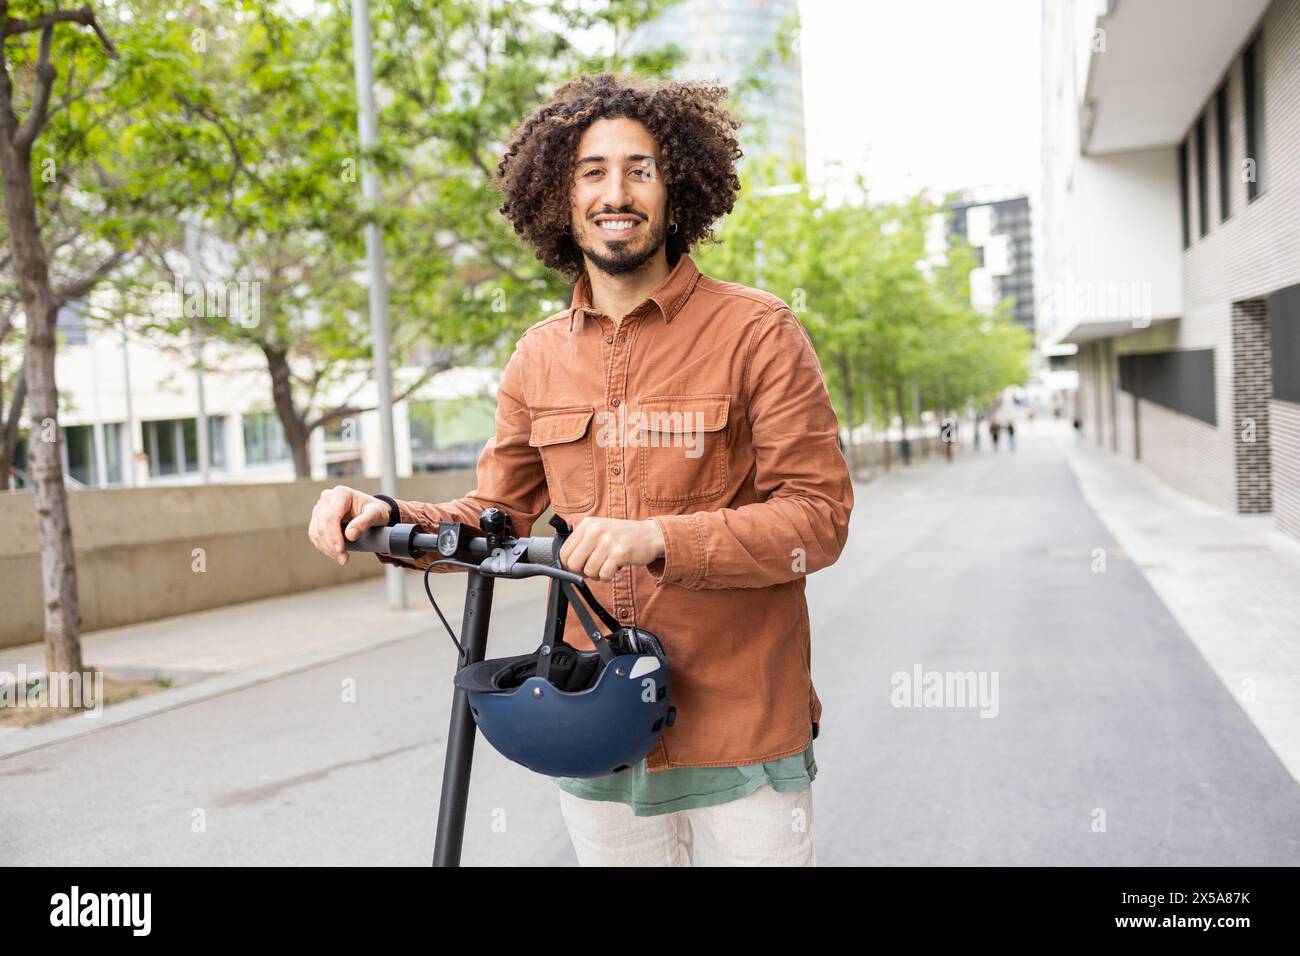 Confident young man with curly hair, smiling while riding an electric scooter in a modern urban environment, holding a helmet Stock Photo